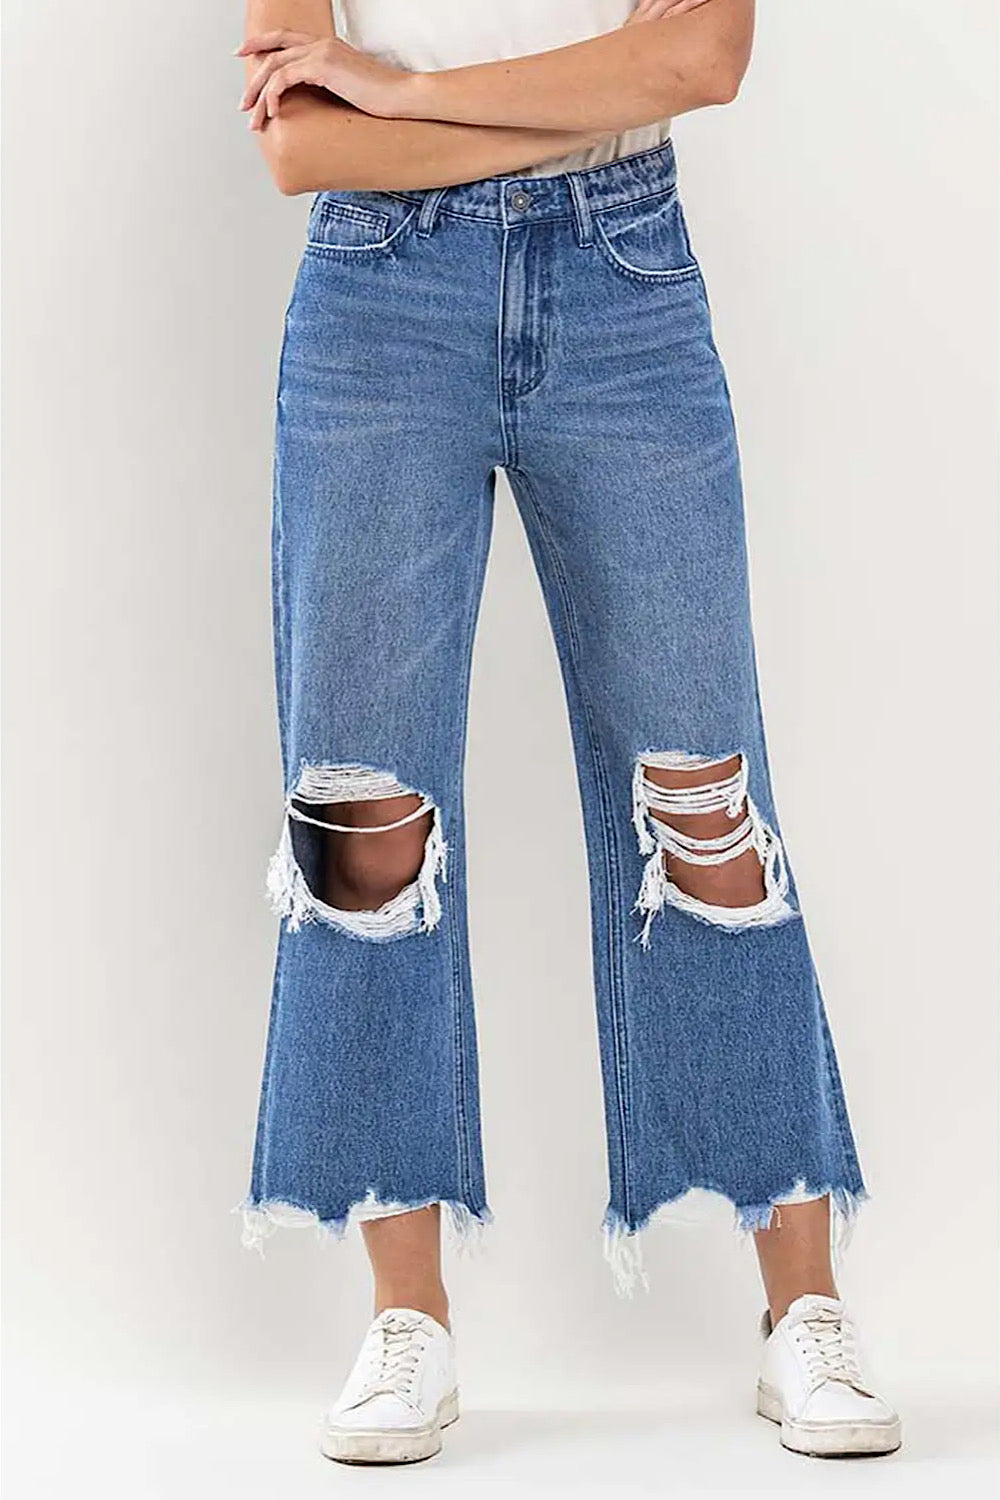 90’S VINTAGE CROP FLARE MIRACULOUSLY